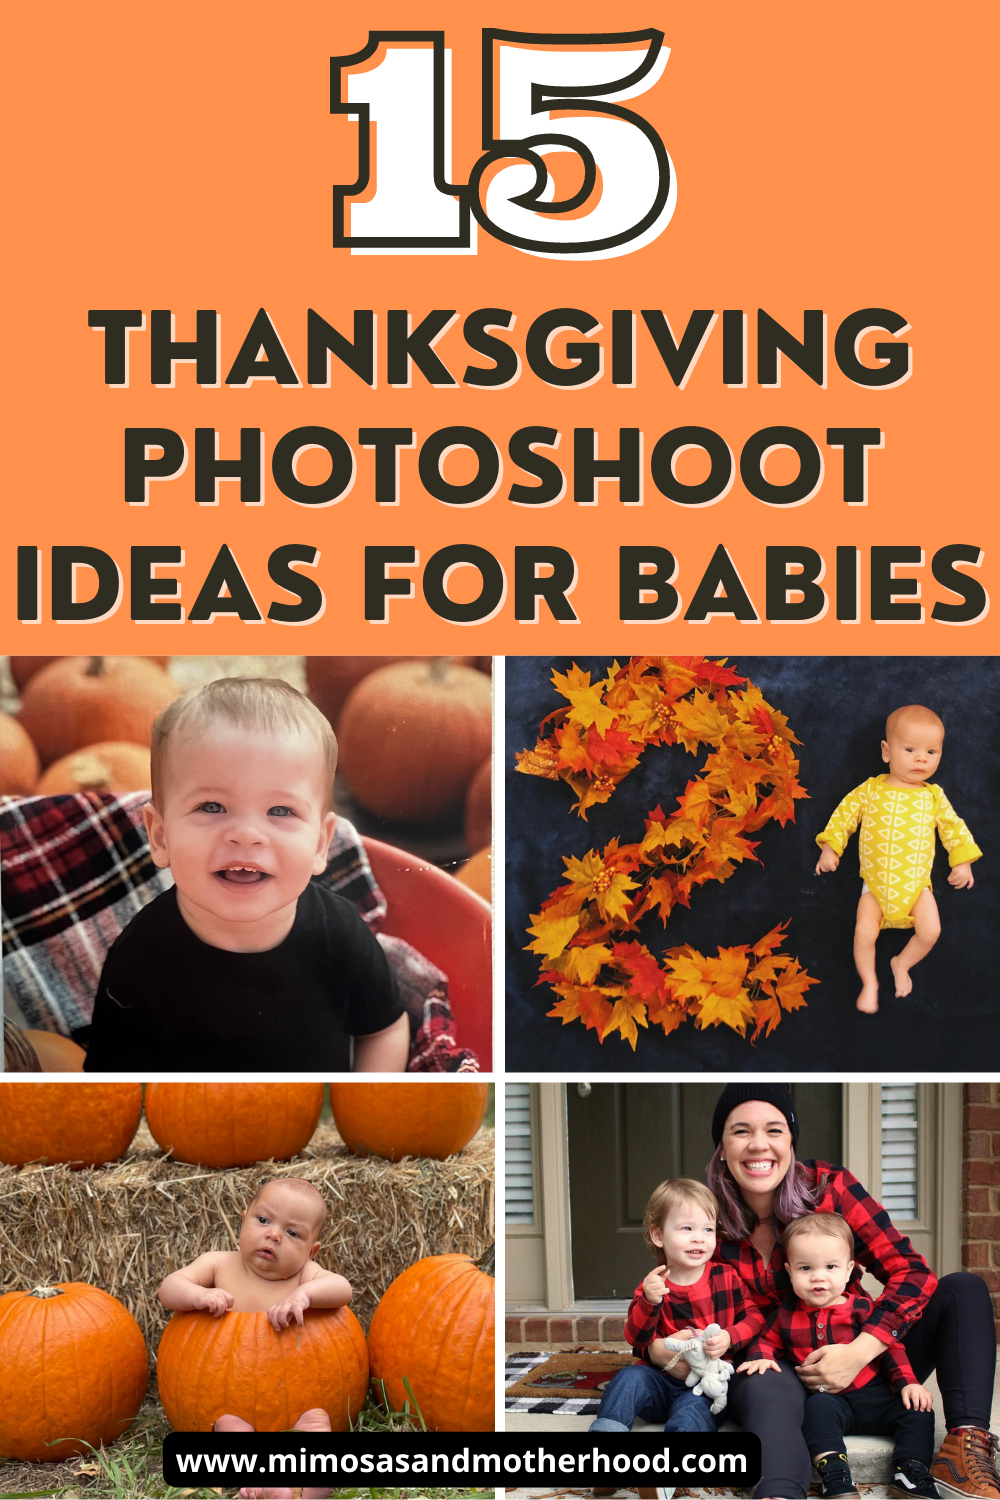 15 Thanksgiving Photoshoot Ideas for Babies